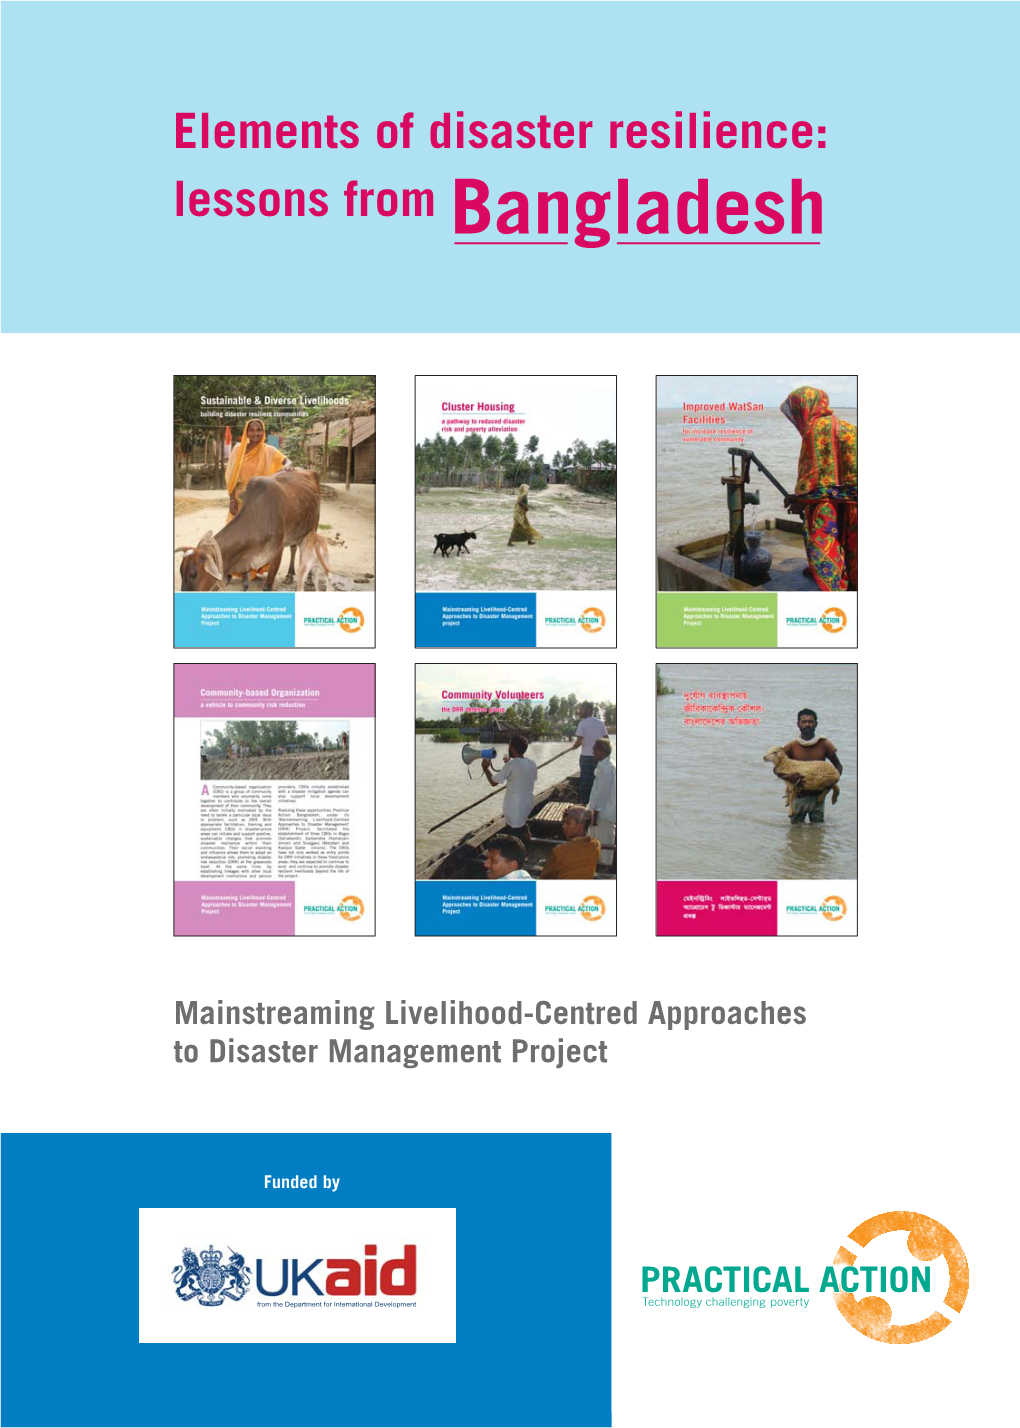 Elements of Disaster Resilience: Lessons from Bangladesh